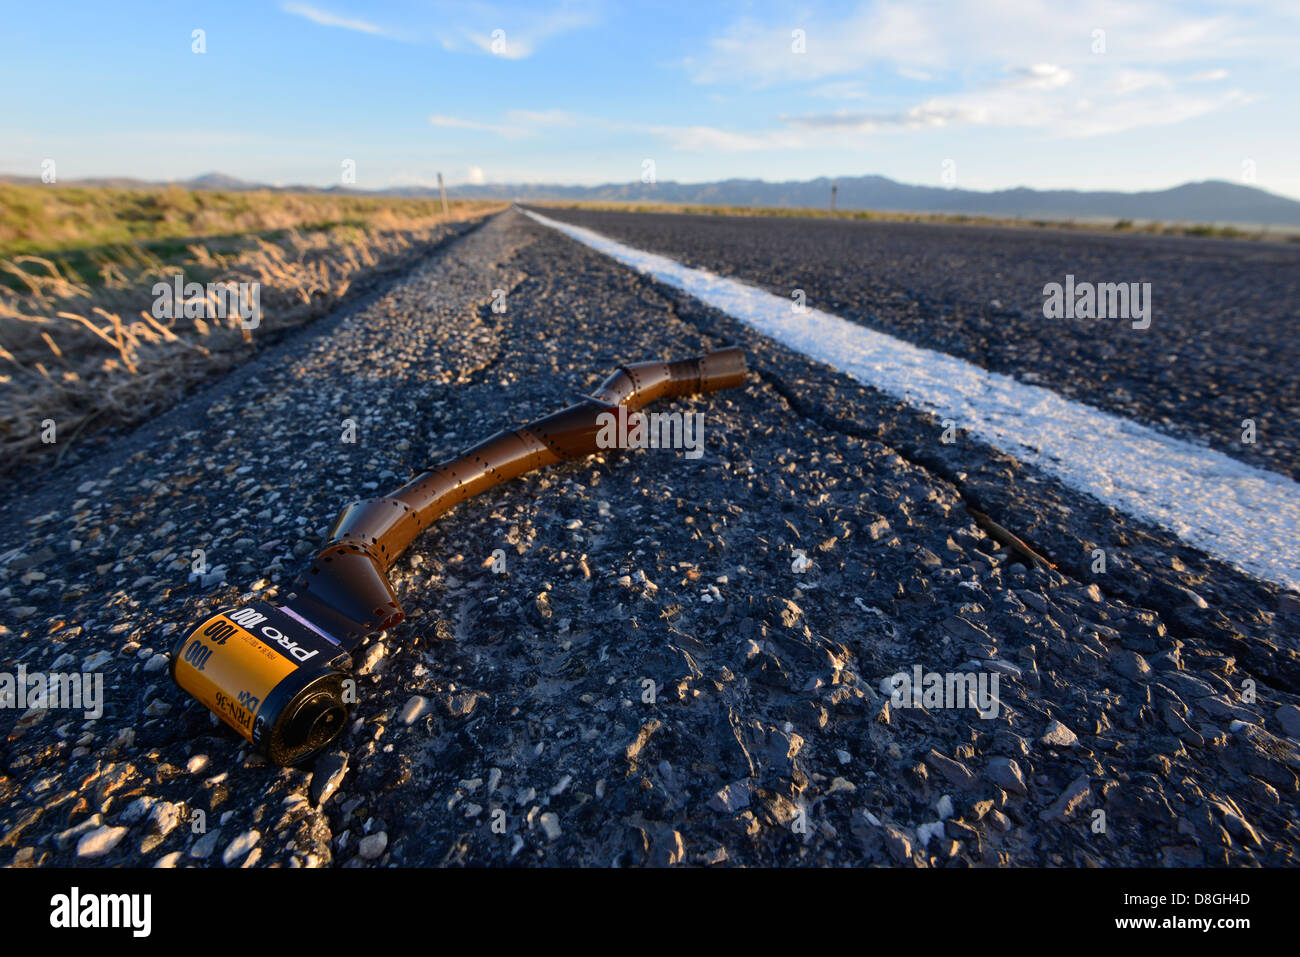 Discarded roll of film along the side of highway in the Great Basin region of Utah. Stock Photo